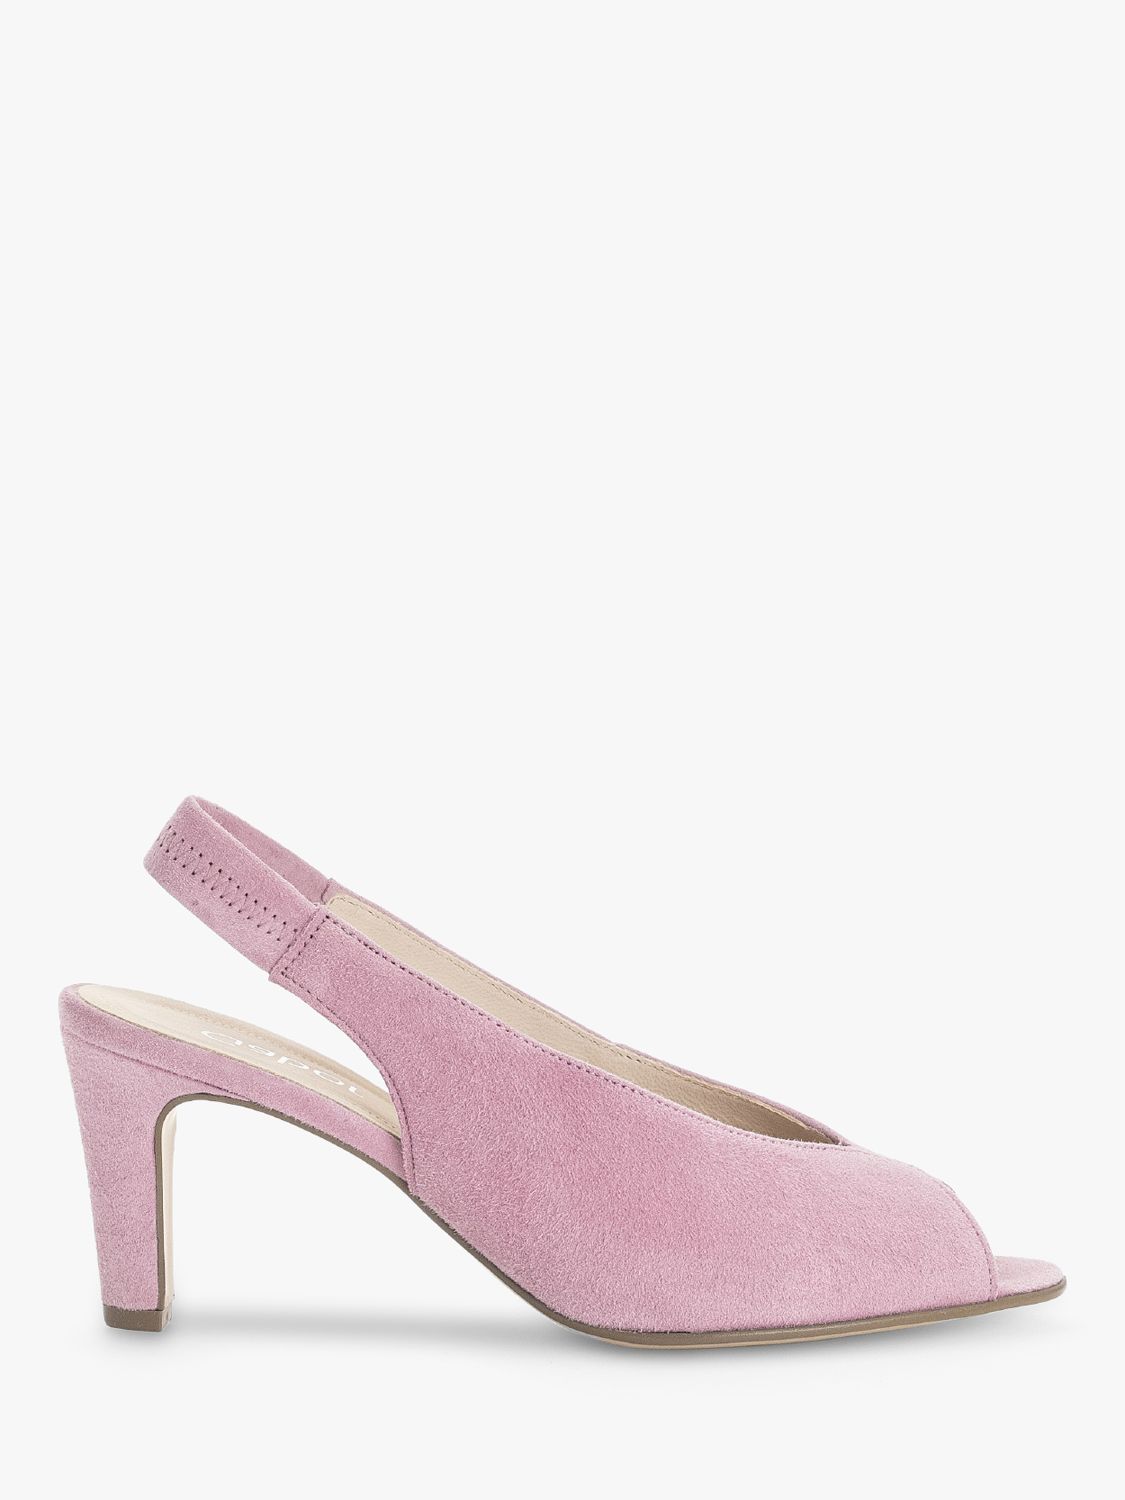 Buy Gabor Eternity Suede Peep Toe Court Shoes, Pink Online at johnlewis.com